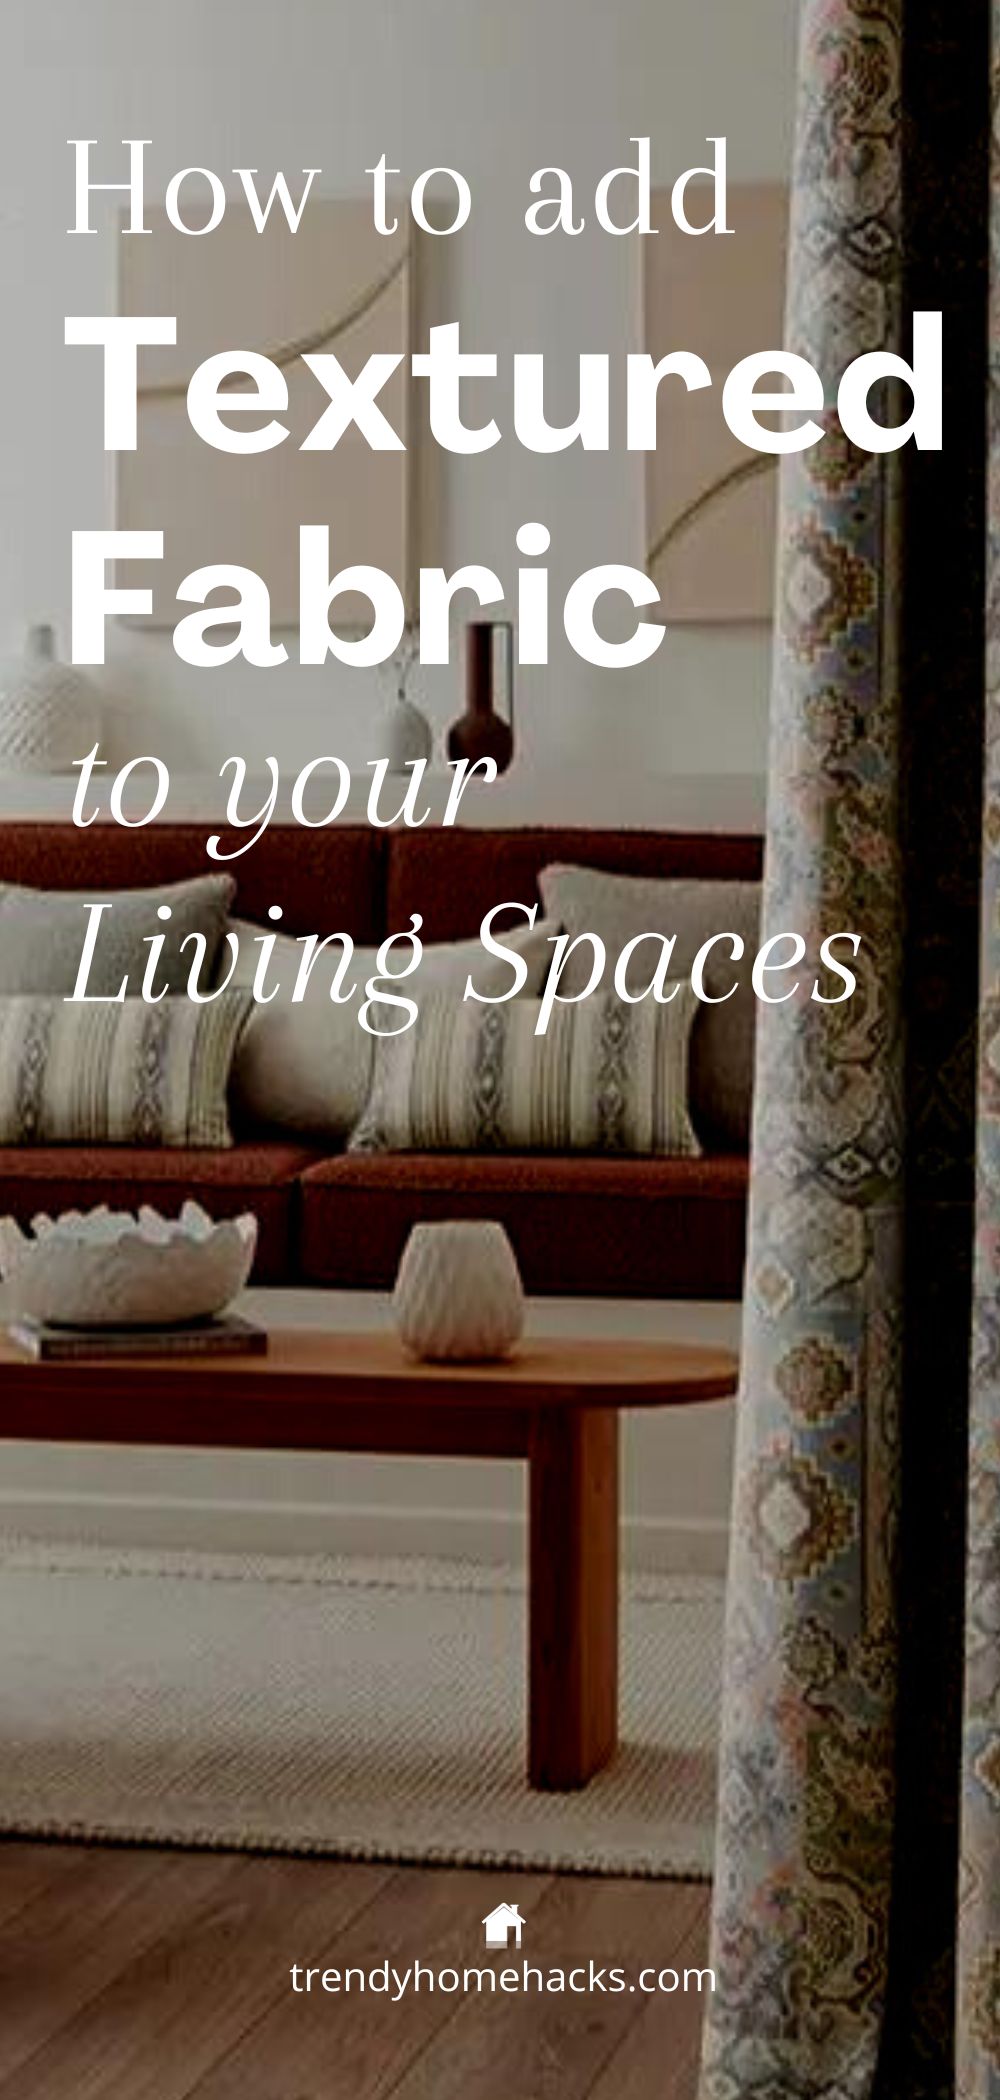 pinterest pin with title 'how to add Textured Fabric to your Living Spaces'